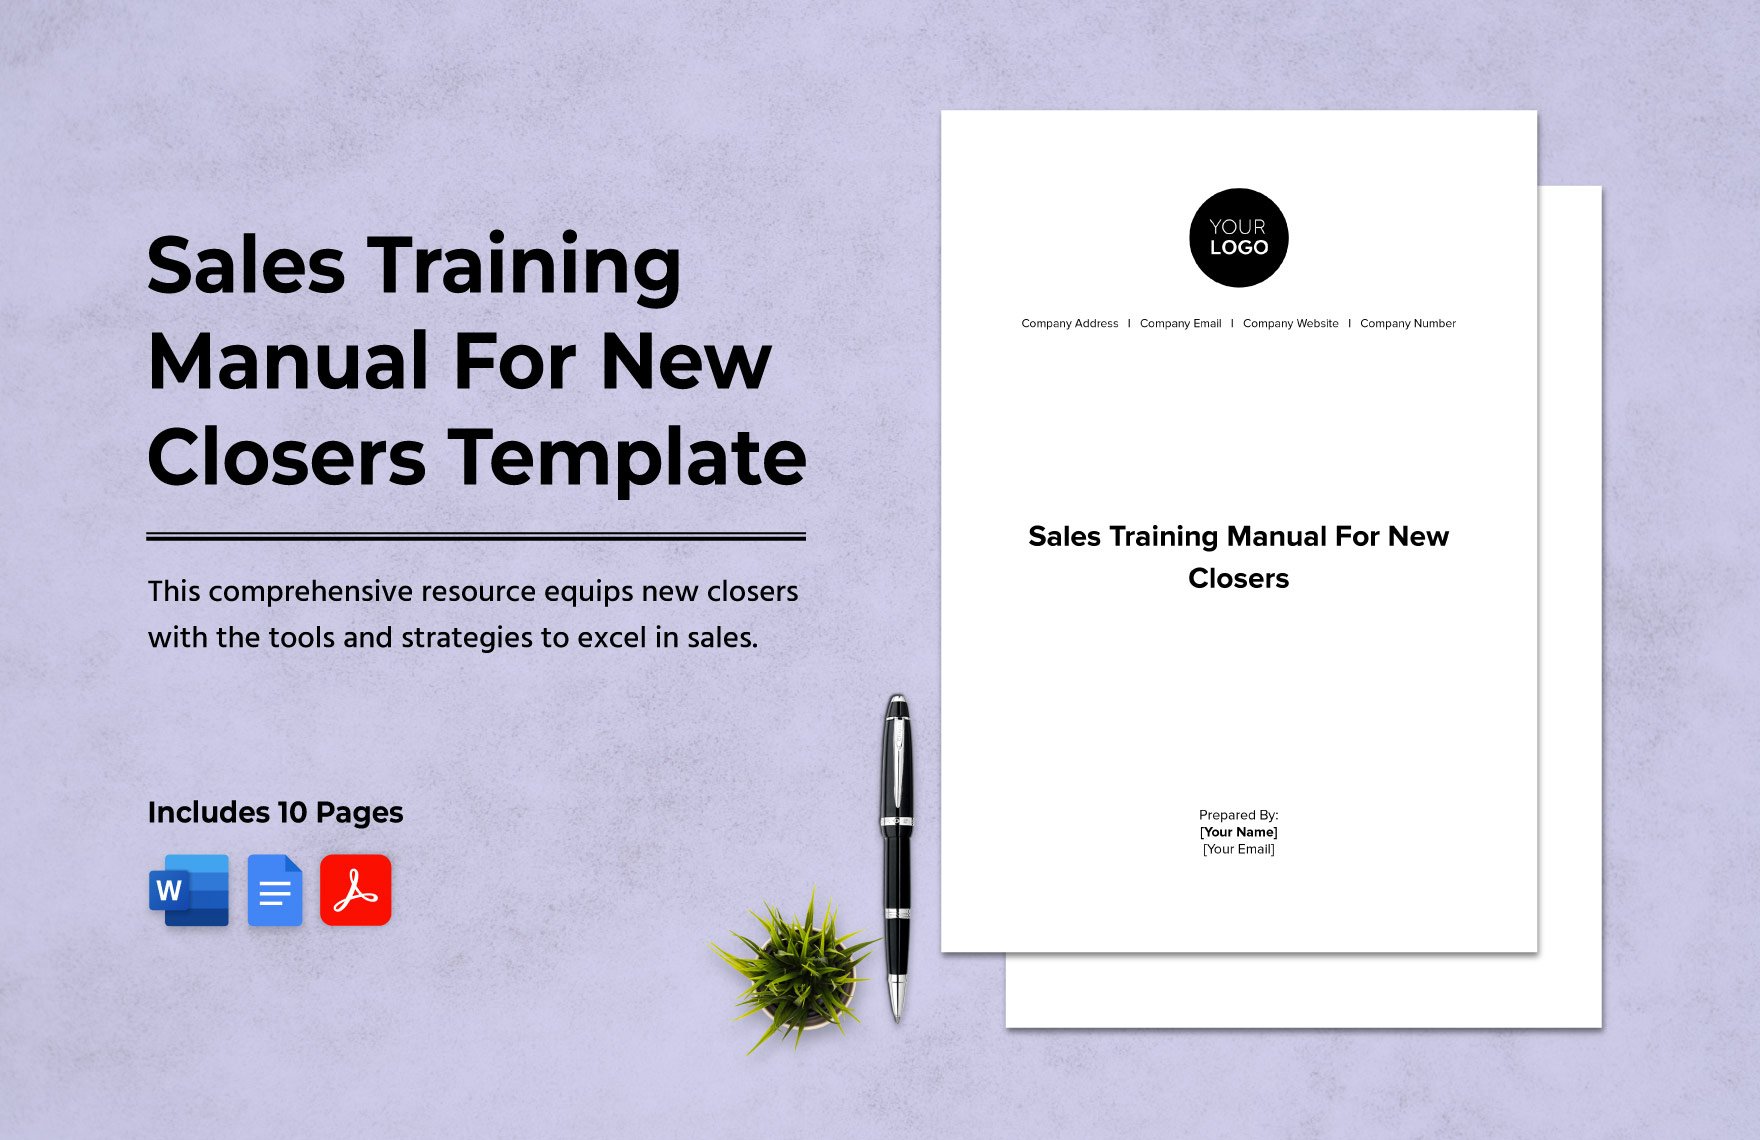 Sales Training Manual For New Closers Template in Word, Google Docs, PDF